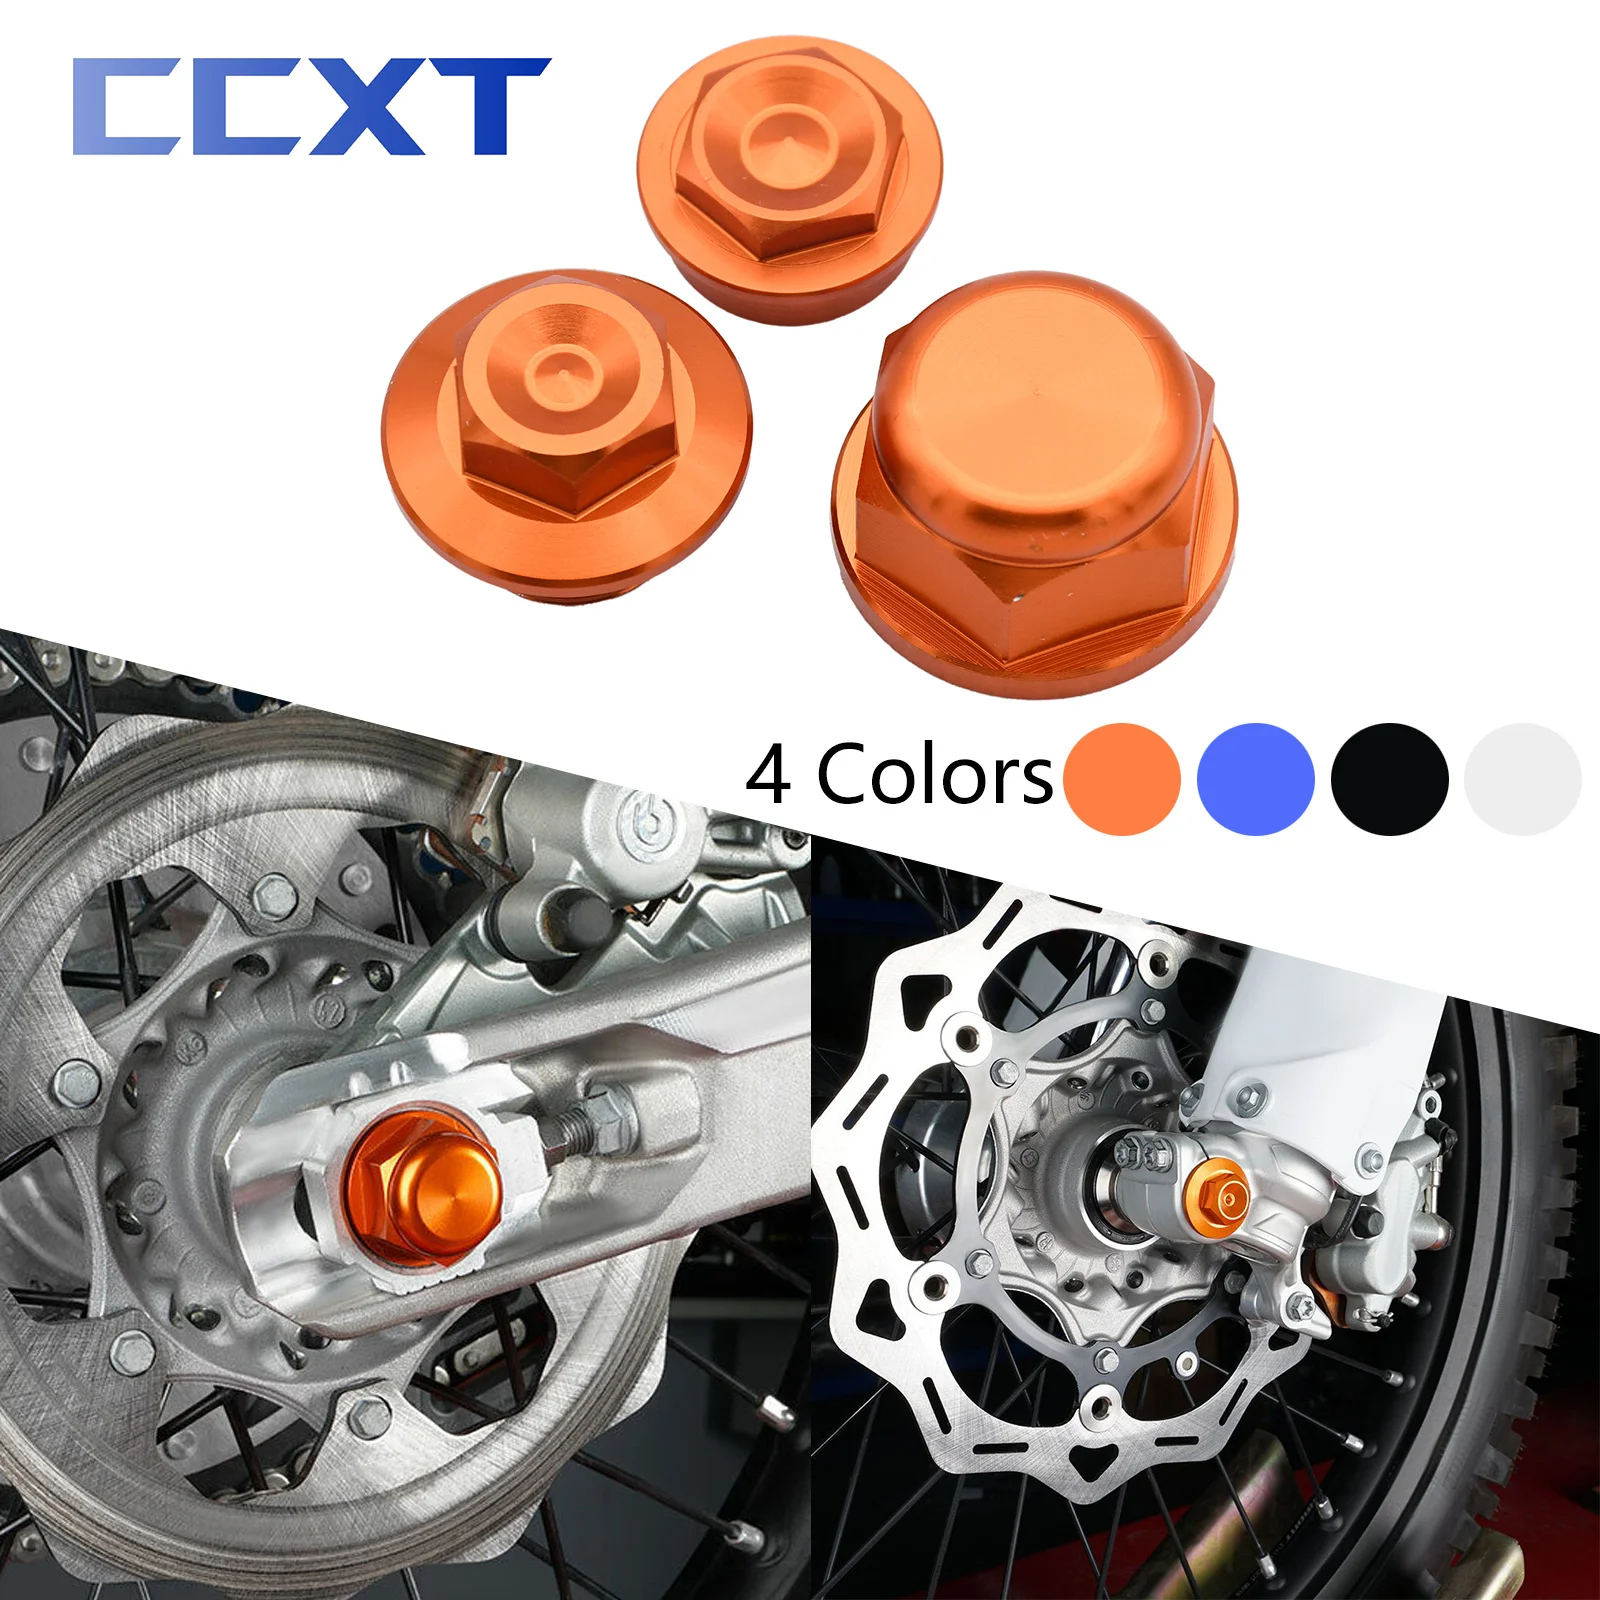 

CNC Front Wheel Lock Nut Bolt Rear Chain Adjuster Axle Block Wheel Axle Nut Cocer For KTM SX SXF XC XCF EXC EXCF XCW SMR 85-530